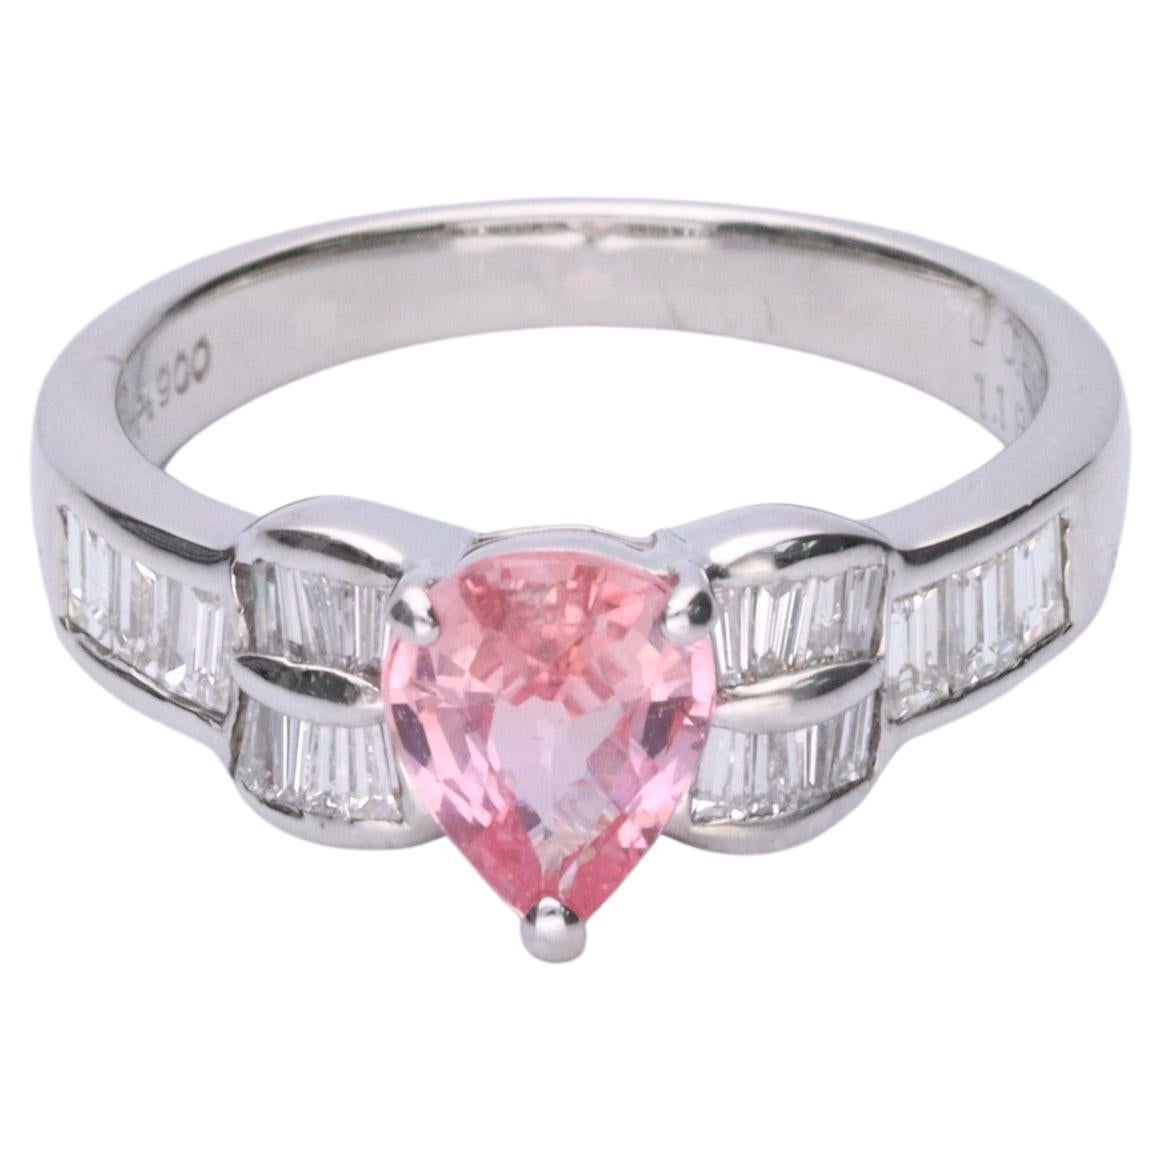 Gin and Grace Platinum 900 Pink Sapphire Diamond Accents Ring for Women/Girls